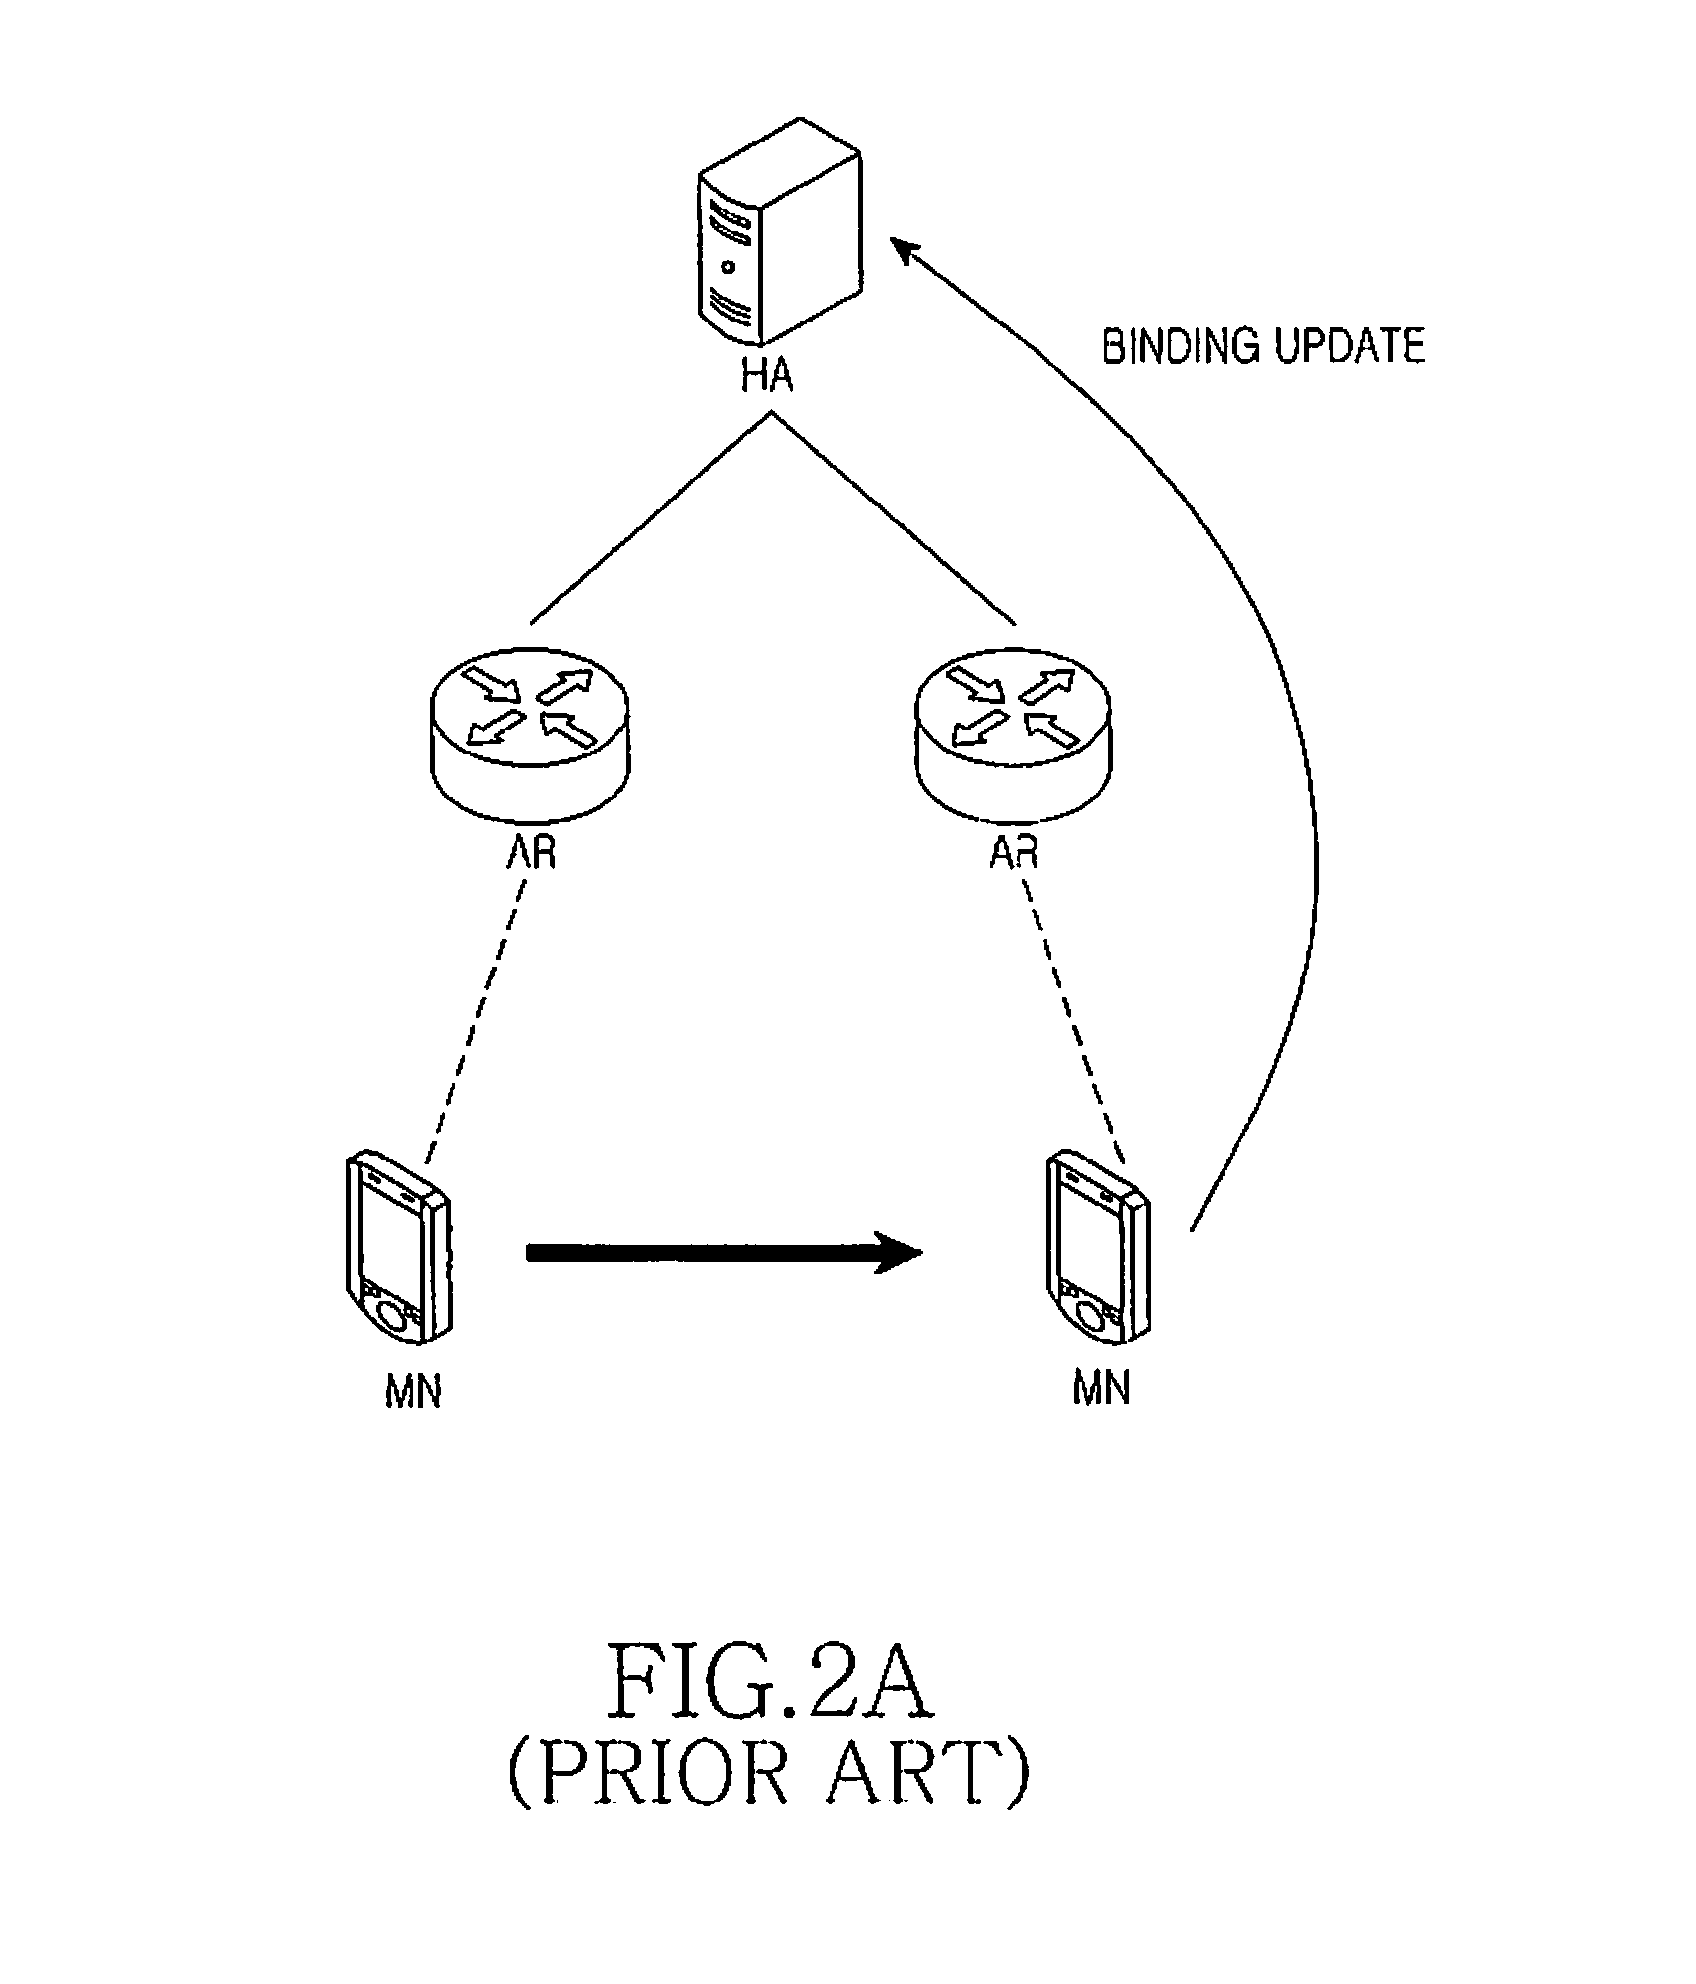 Method for supporting mobility of a mobile node in a multi-hop IP network and a network system therefor